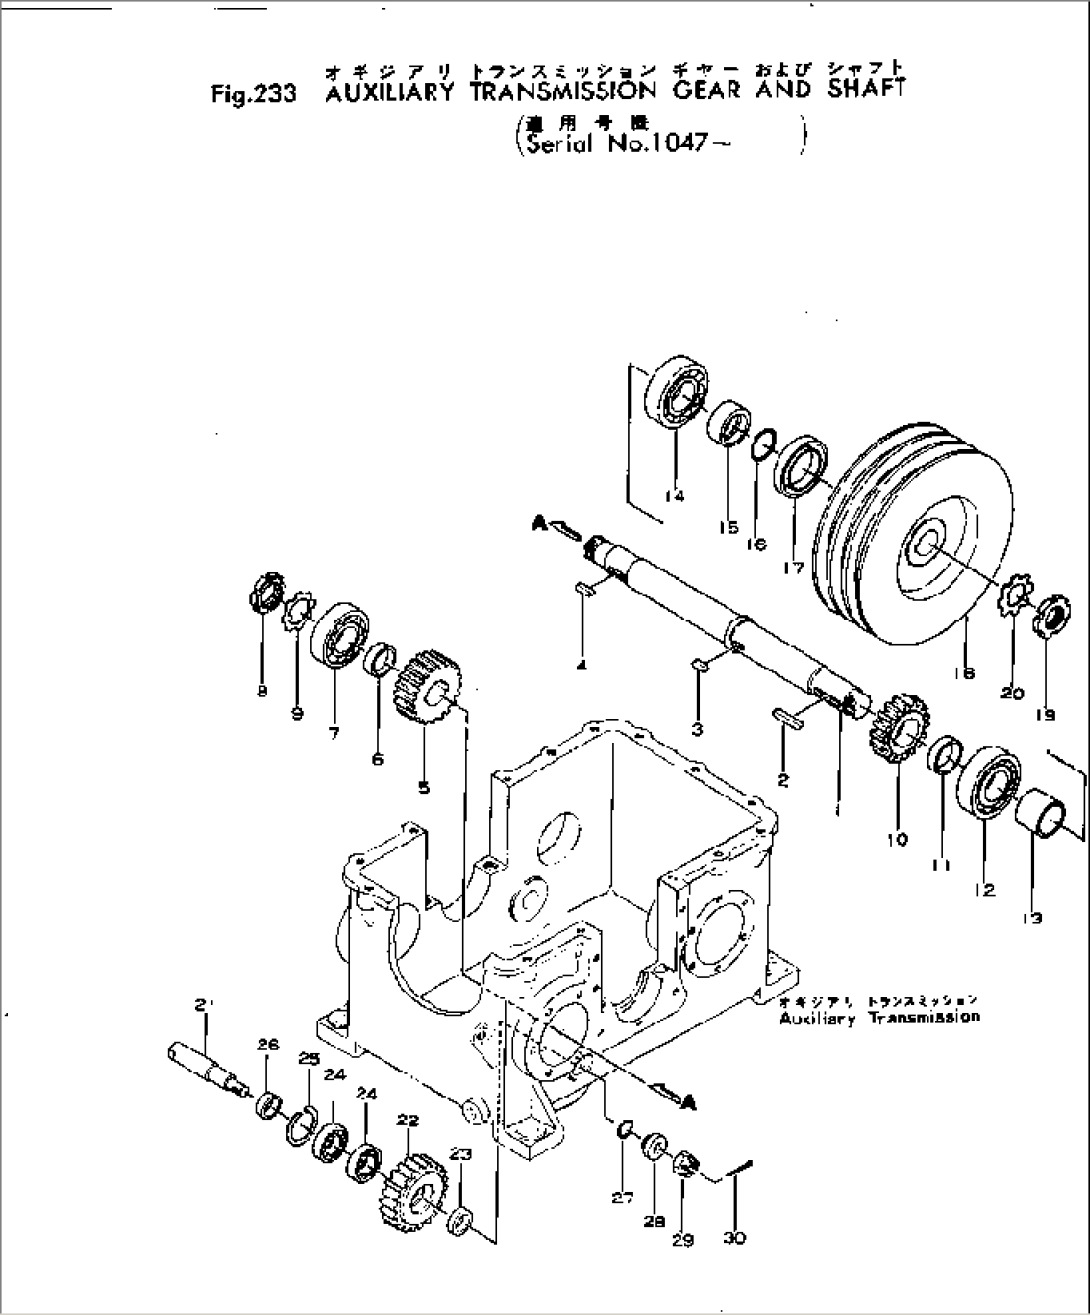 AUXILIARY TRANSMISSION GEAR AND SHAFT